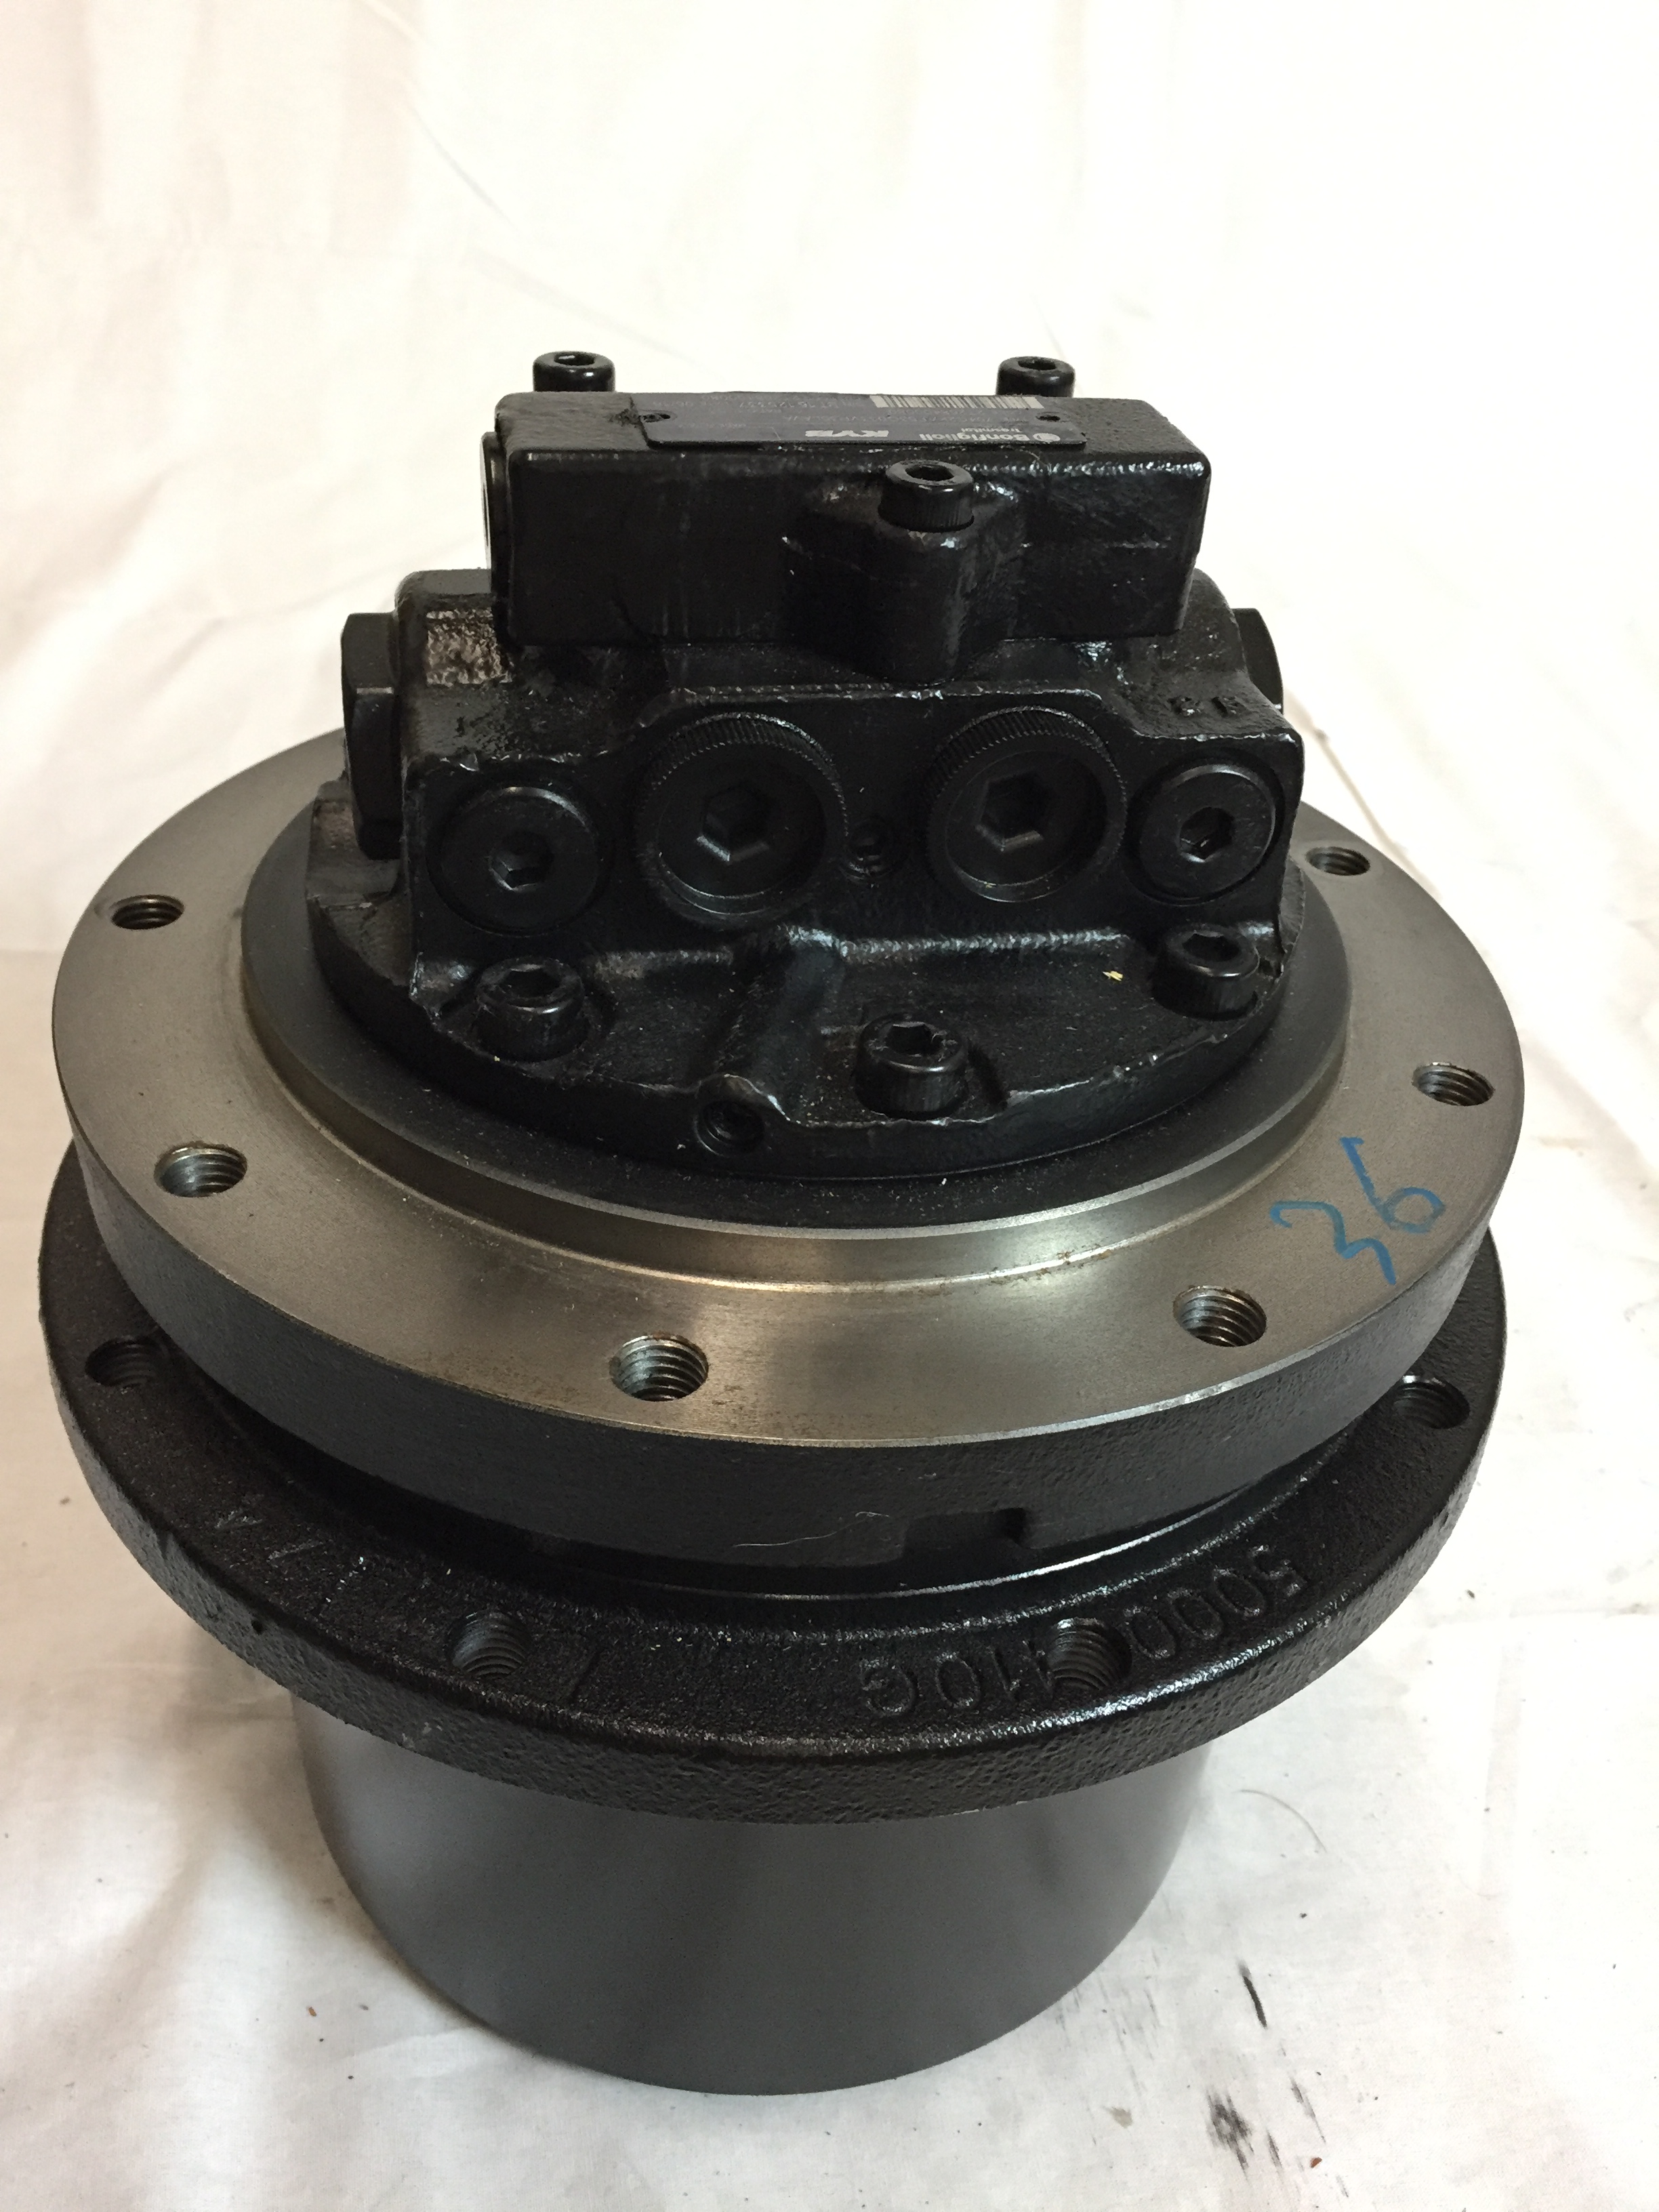 50D Complete Final Drive (Planetary/Travel Drive) with Motor (LOW S/N 244001-274999) Part #4628892,0922101